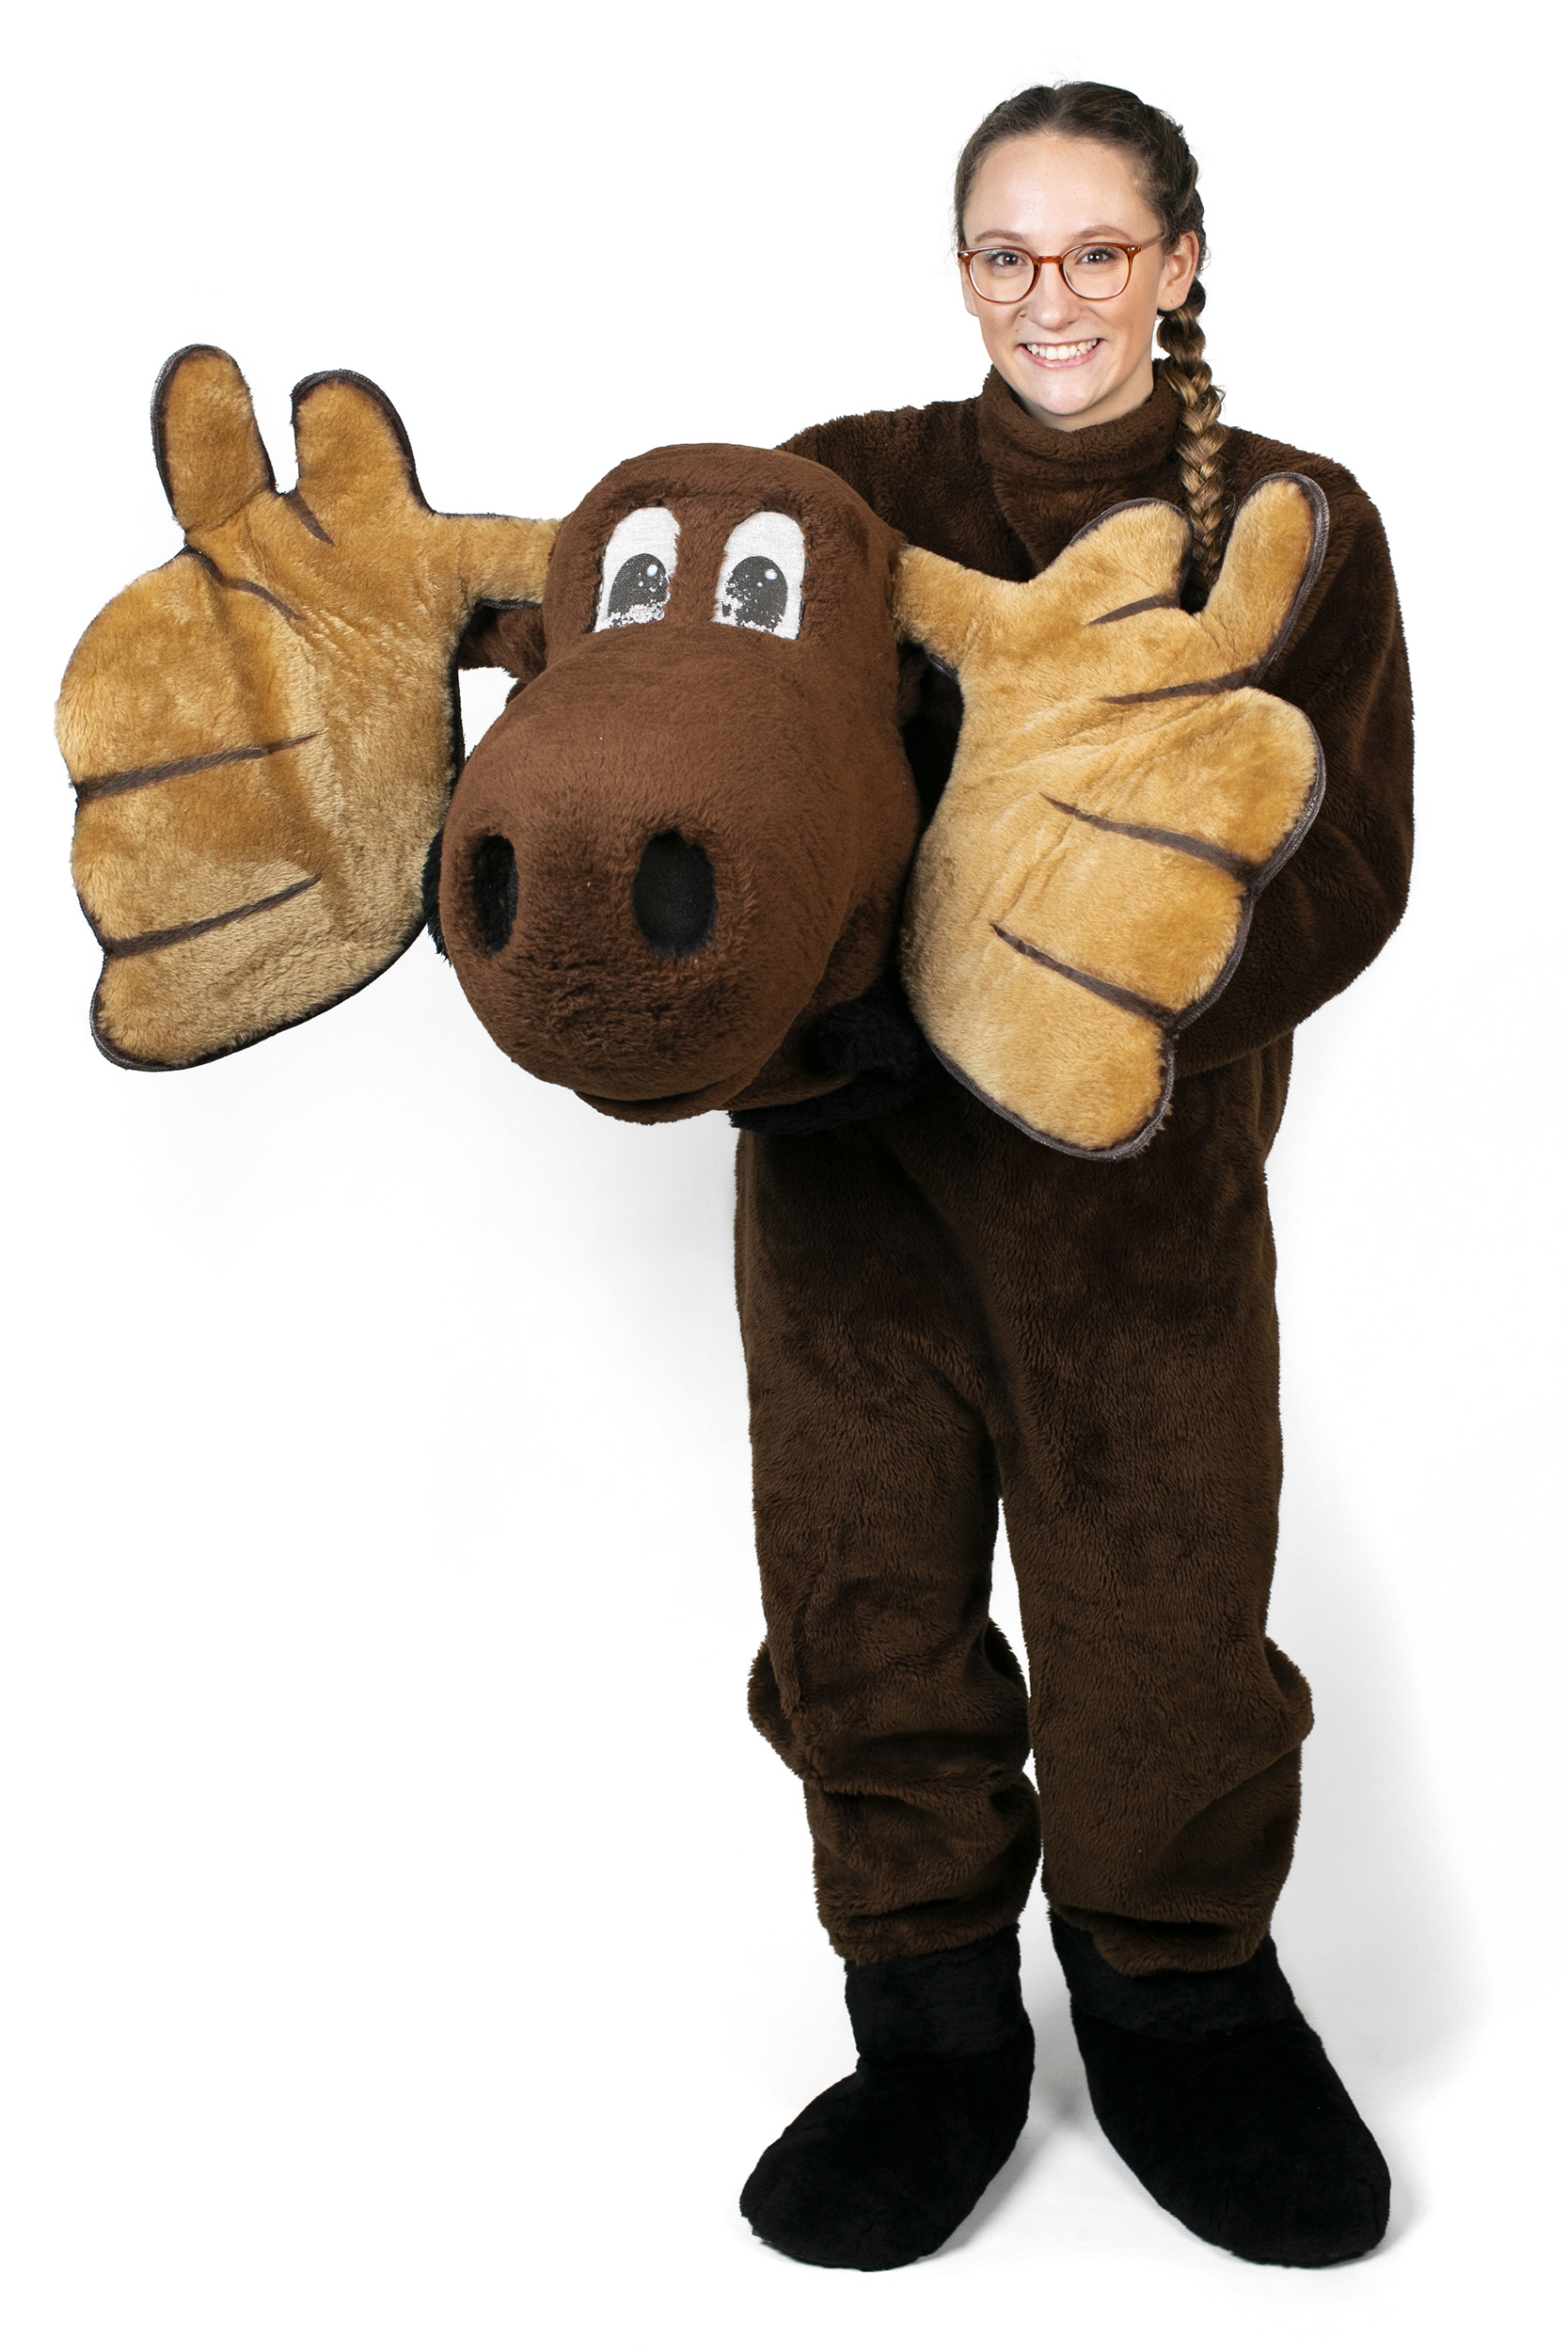 Bella Beckett (dresses as the Moose Mascot for Dunster House.